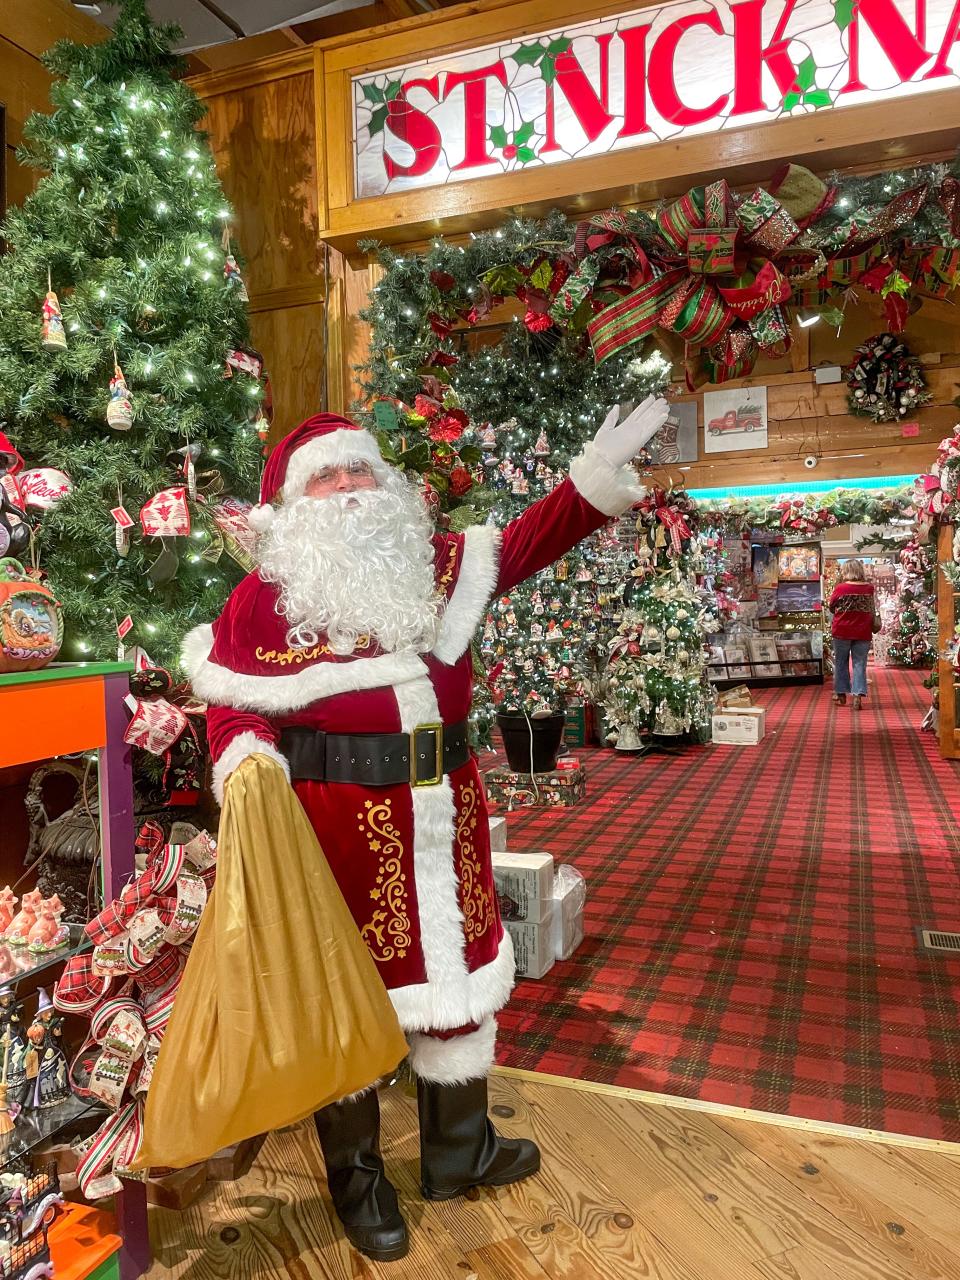 St. Nick Nacks -- located within Callahan's of Calabash -- is one of a few local year-round Christmas shops.